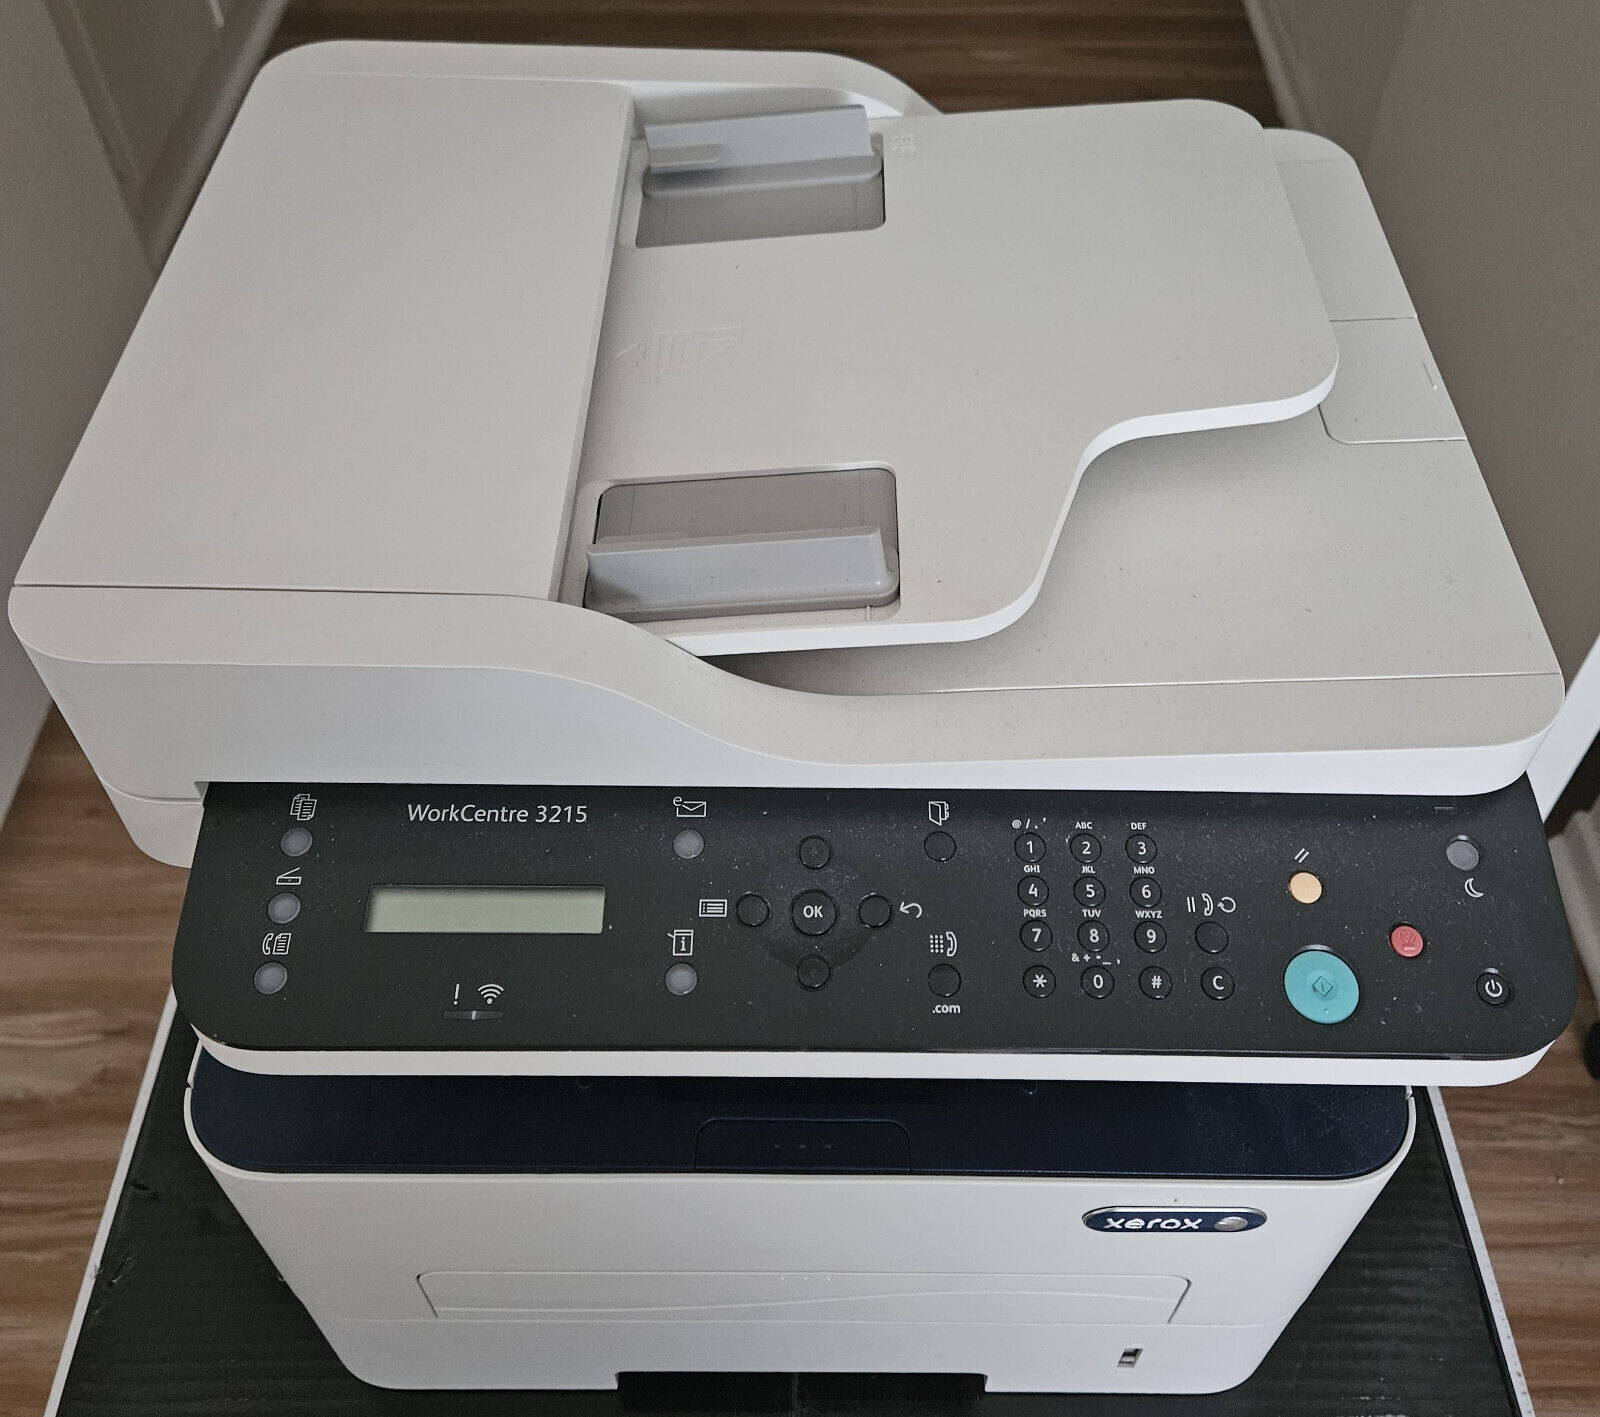 Primary image for Xerox WorkCentre 3215 Monochrome Multifunction Printer !!!